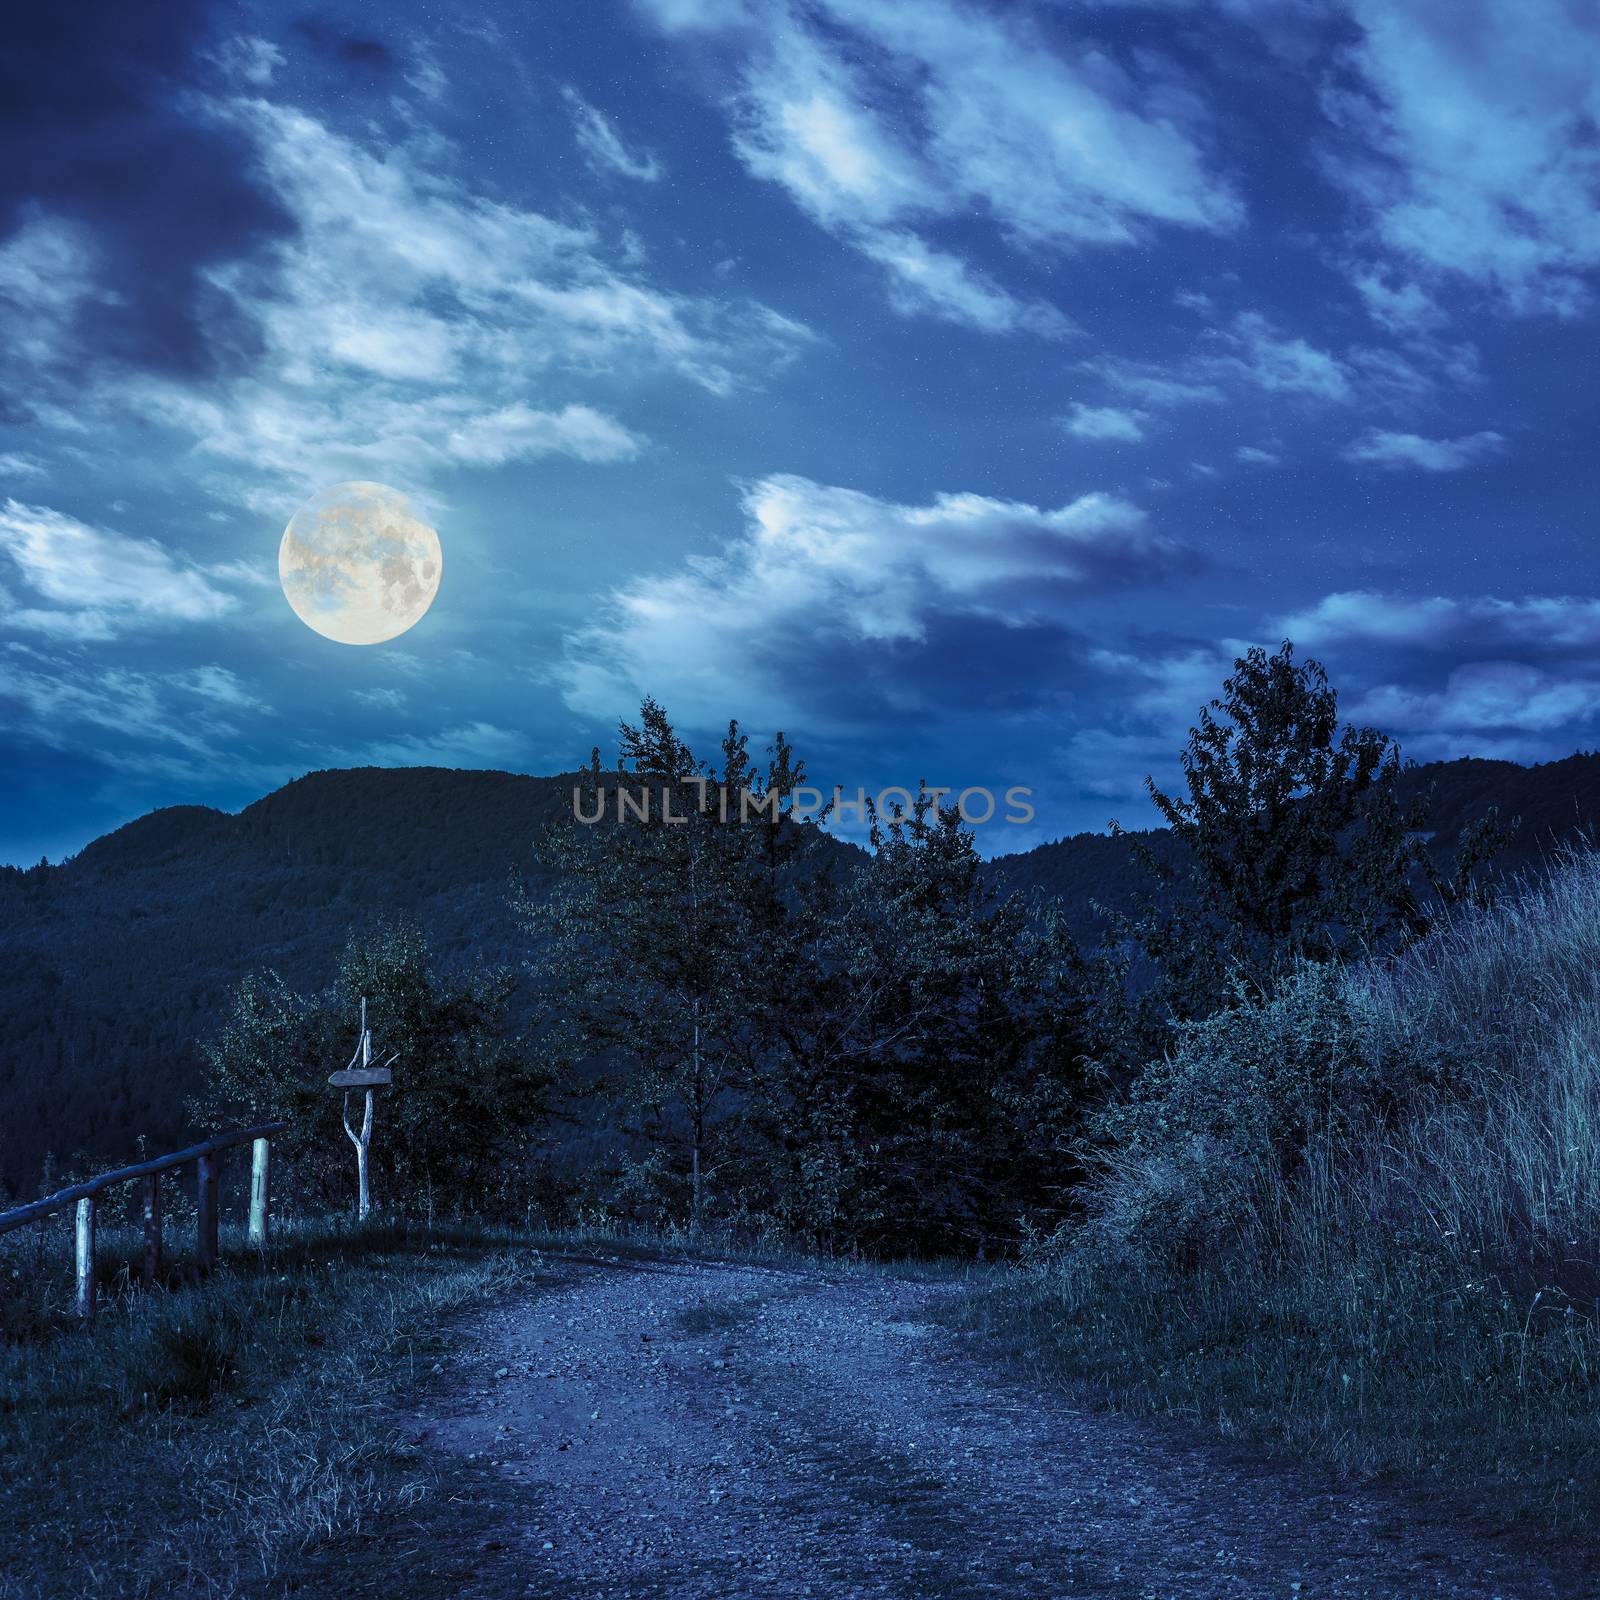 summer landscape. fence near the path on the hillside in high mountain at night in full moon light